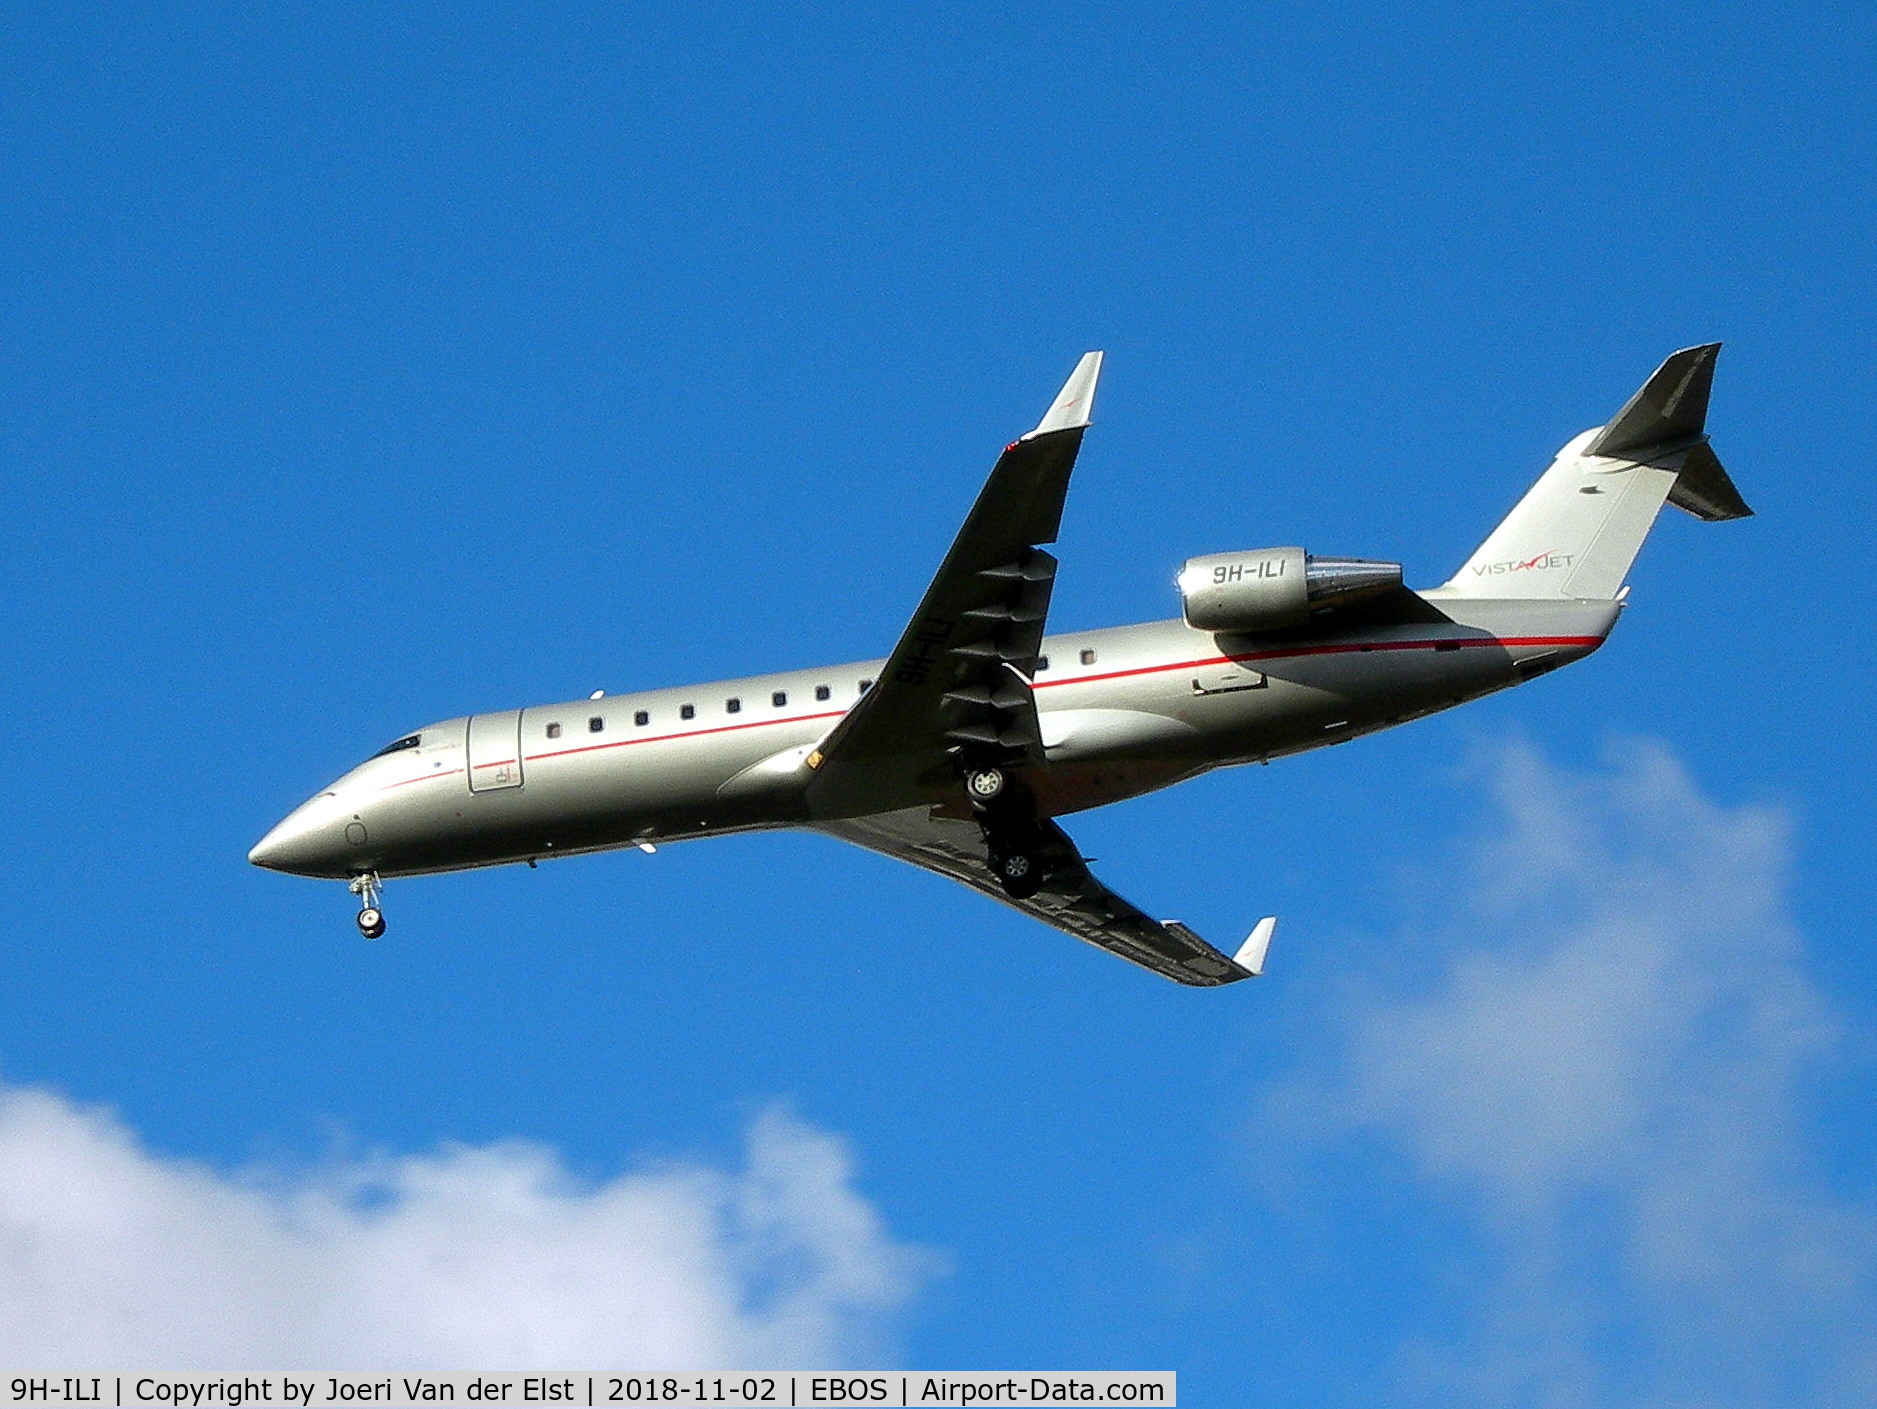 9H-ILI, 2005 Bombardier Challenger 850 (CL-600-2B19) C/N 8048, Moments before touchdown rwy26, training flight